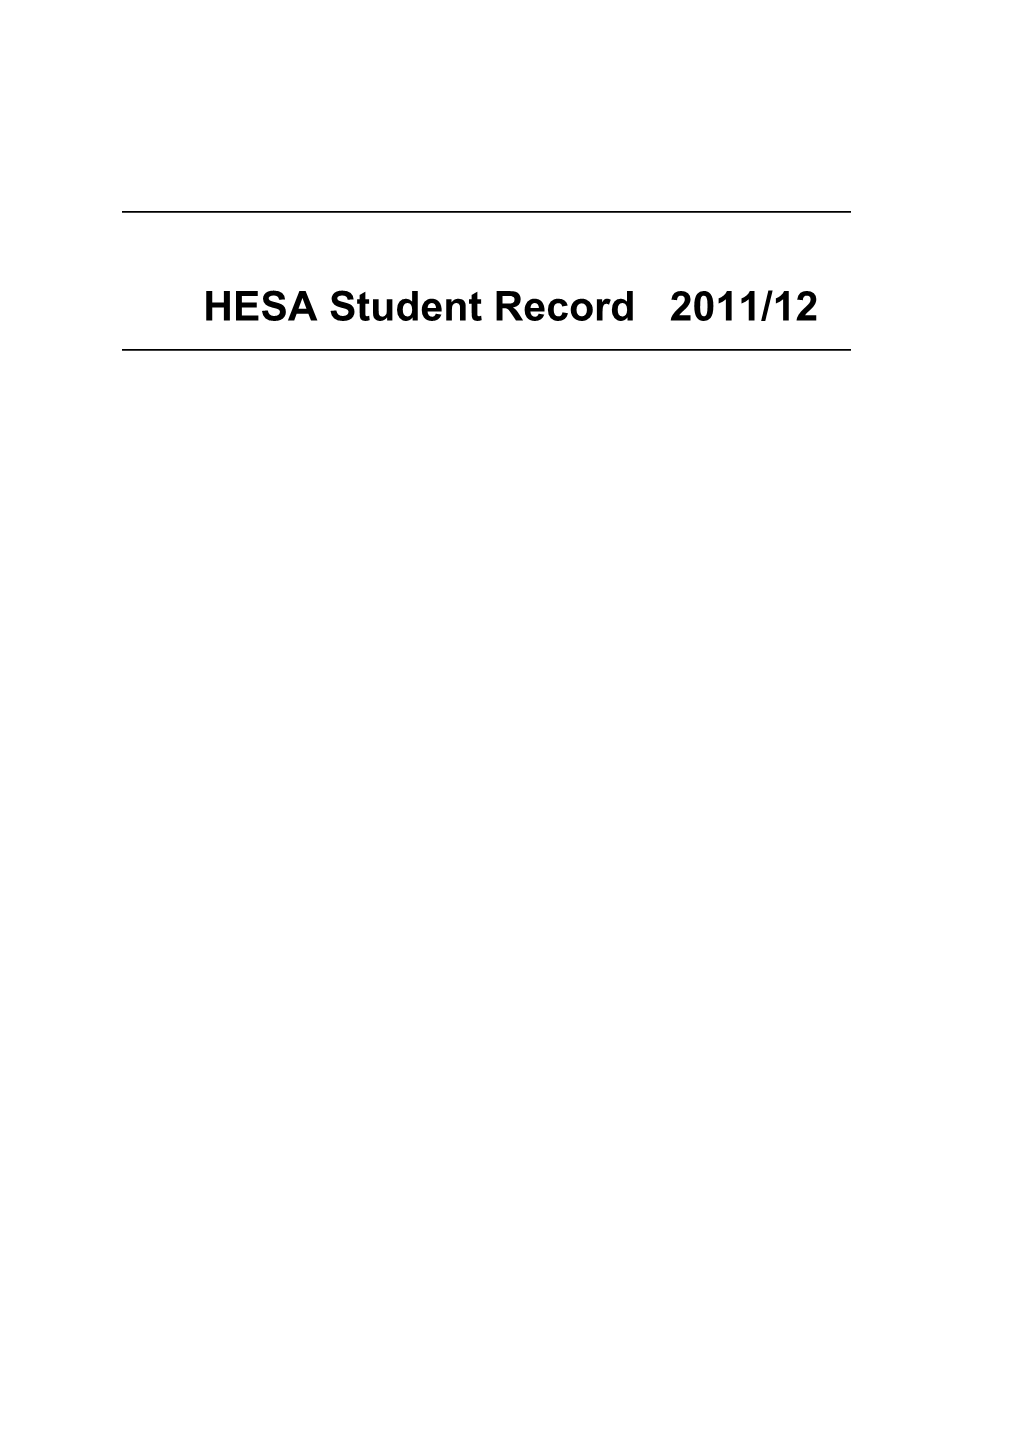 HESA Student Record 2011/12 Table of Contents (By Entity)